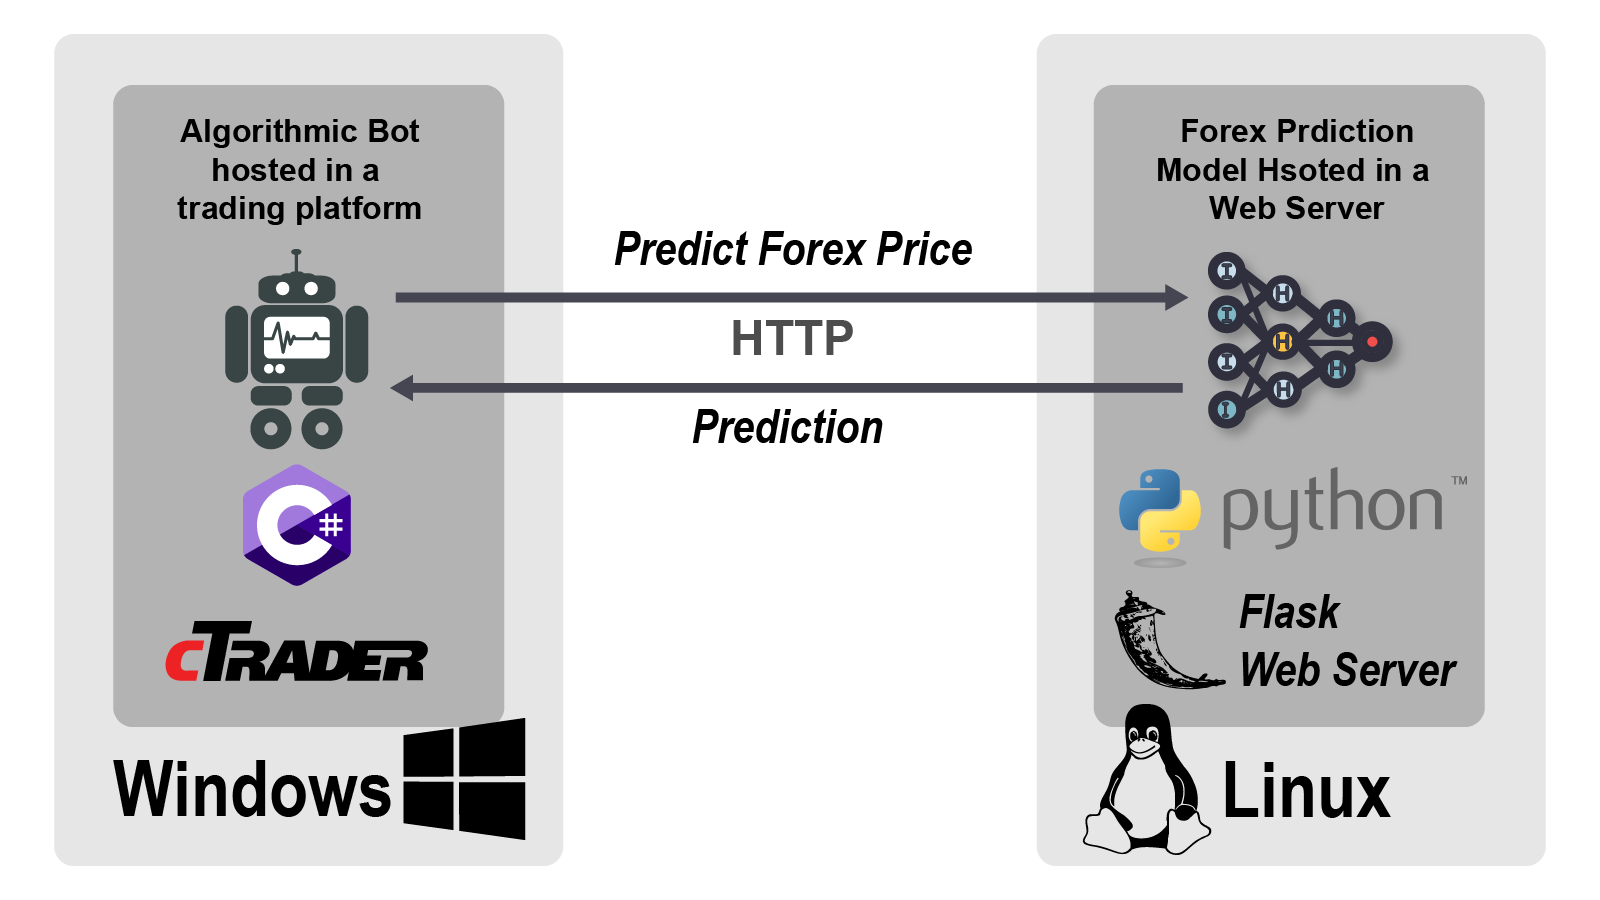 Using a TensorFlow Deep Learning Model for Forex Trading